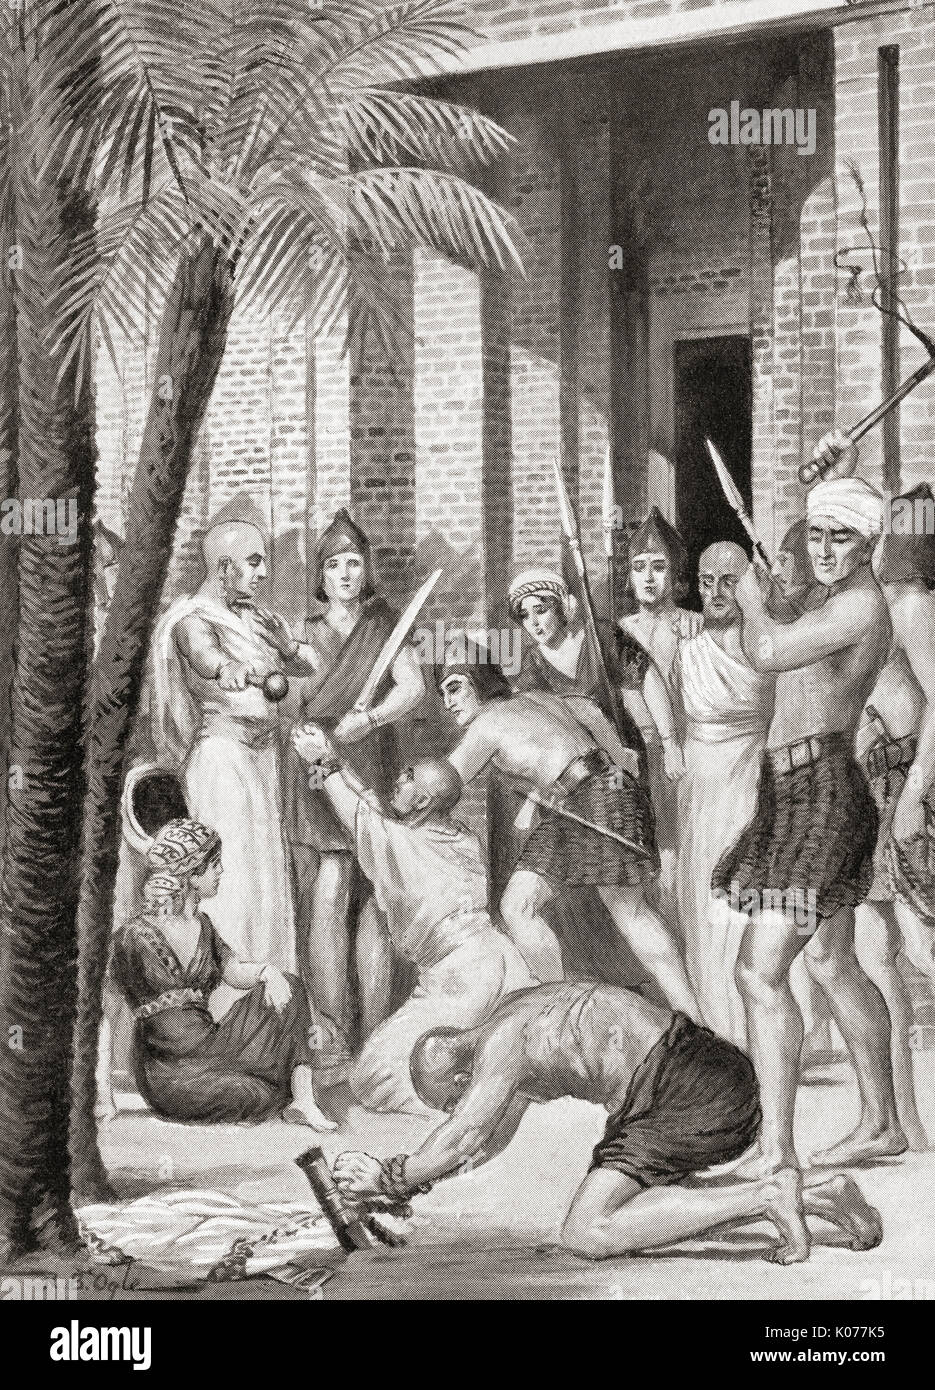 The reforms of Urukagina, some of which included removing corrupt officials from their posts, seen here are said officials receiving punishment.  Uru-ka-gina, Uru-inim-gina, or Iri-ka-gina, c. 24th century BC.  King of  Lagash in Mesopotamia.  From Hutchinson's History of the Nations, published 1915. Stock Photo